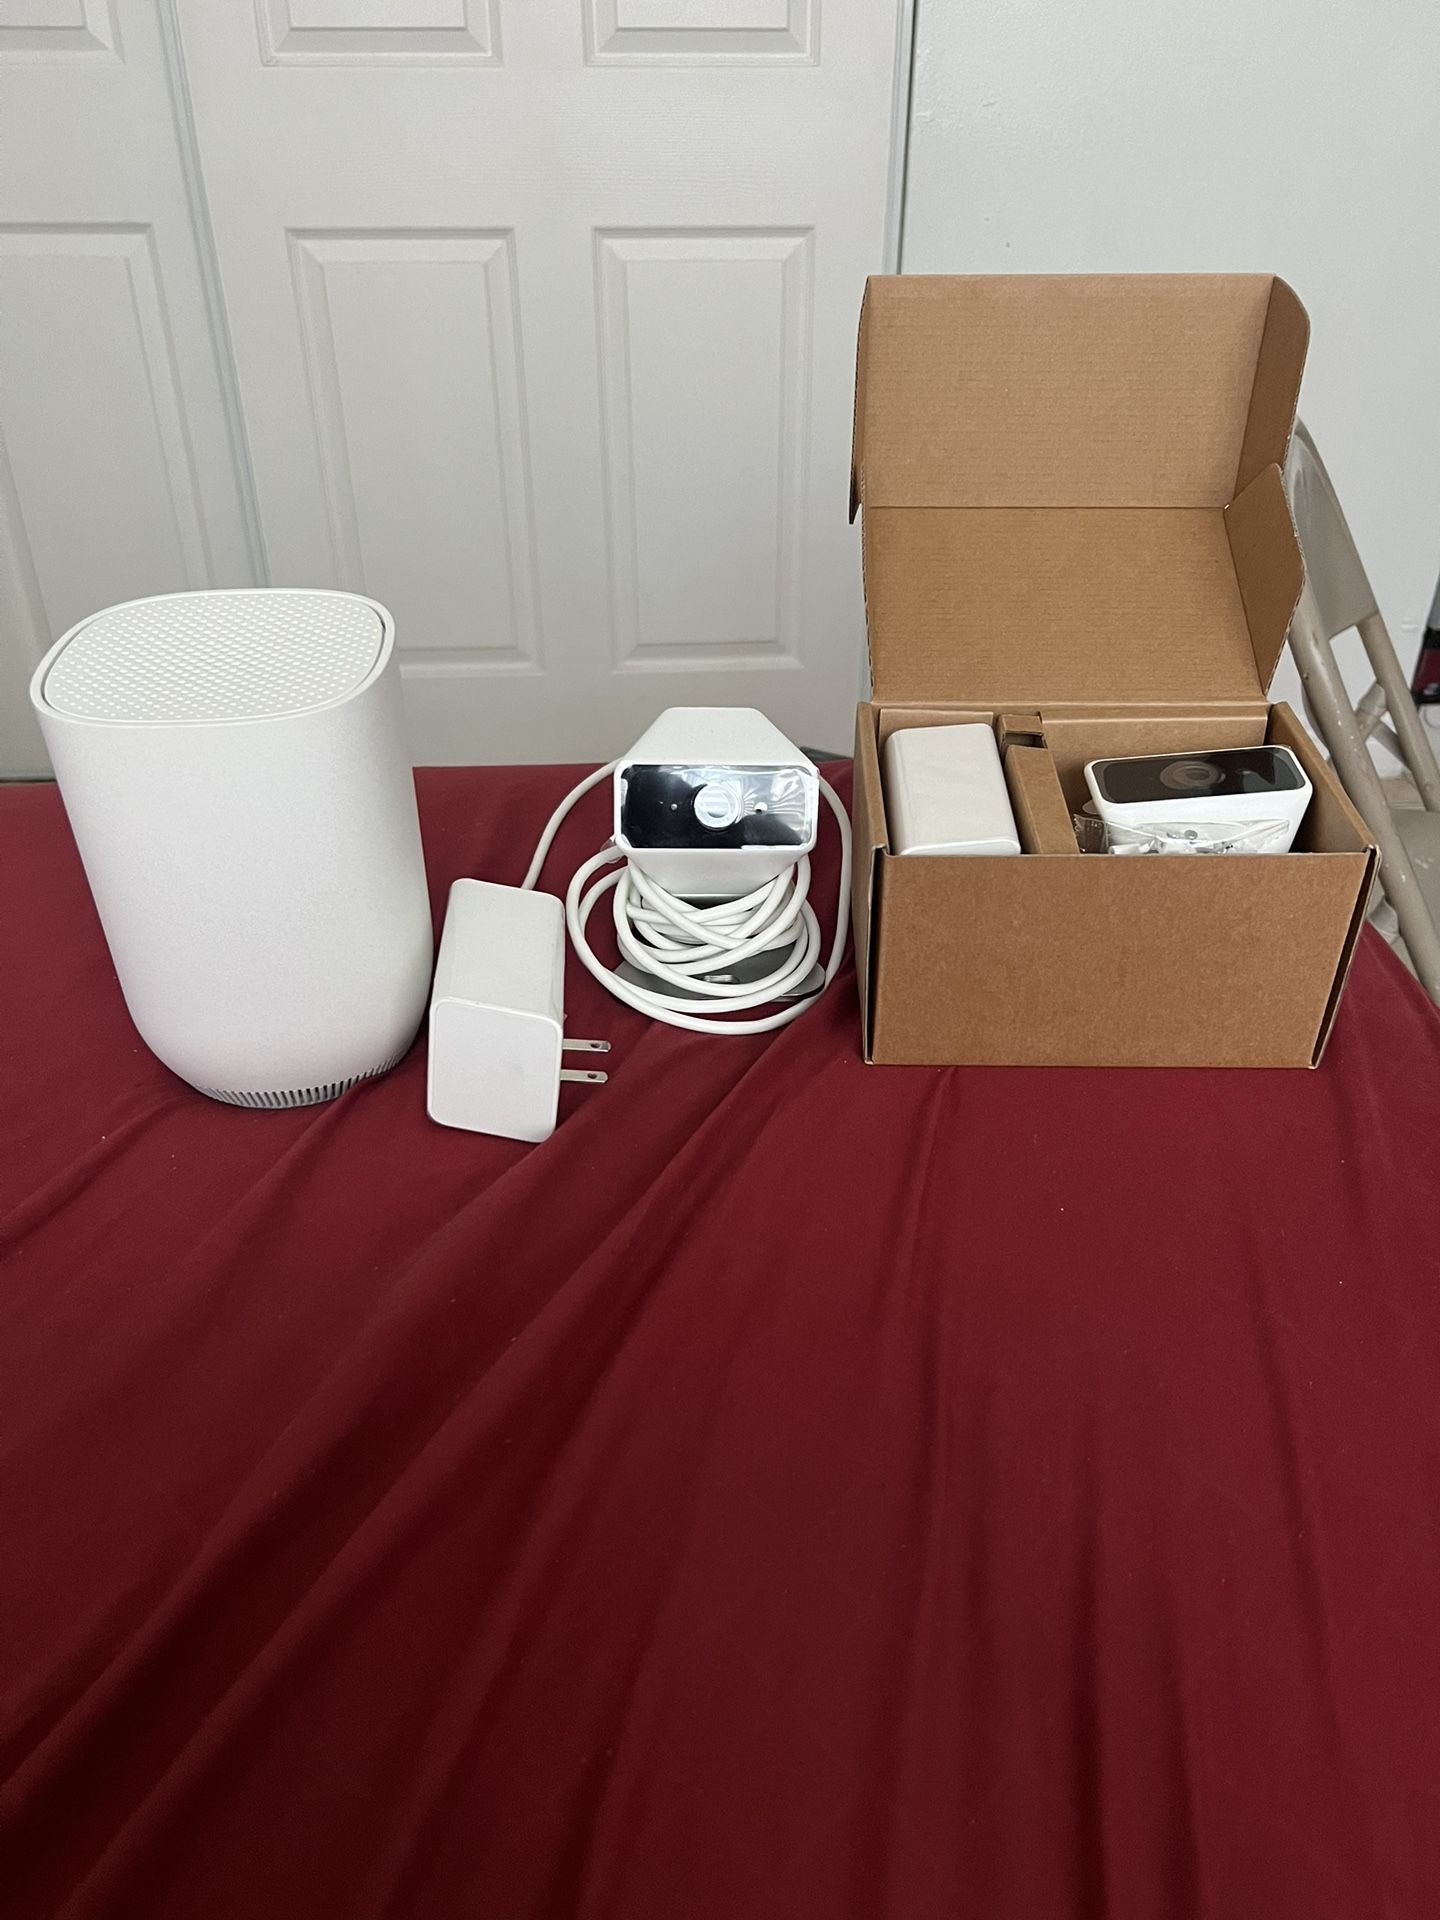 2 XFINITY INDOOR/OUTDOOR CAMERAS WIRED & 1 XFINITY STORM READY WIFI INTERNET BACK UP DEVICE!!!